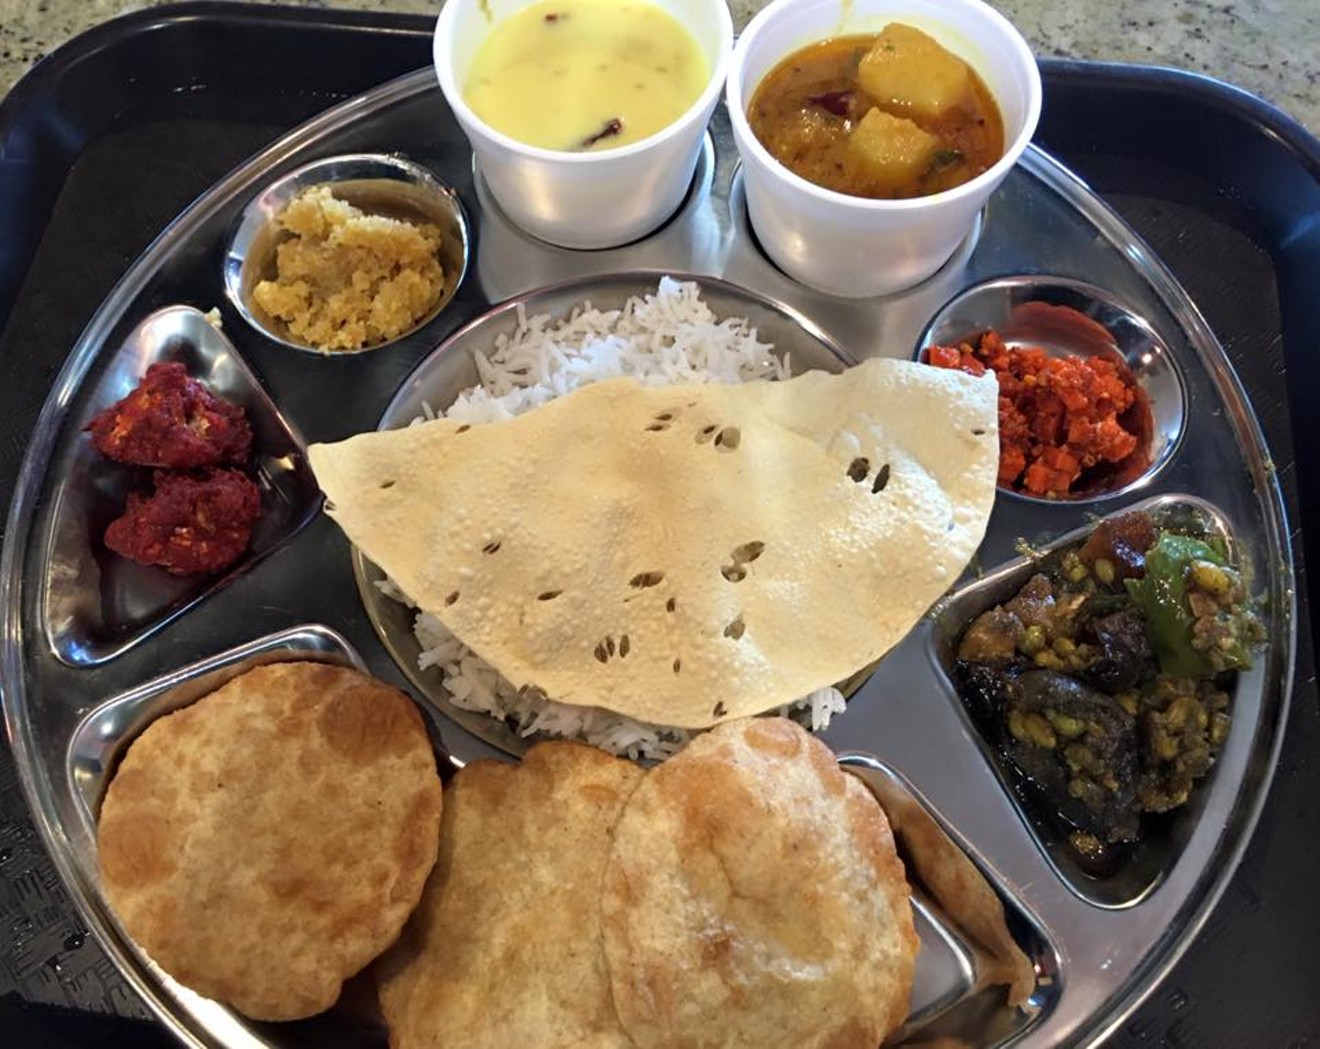 A Gujarati thali offers a classic sampling of the culinary gems in this region.